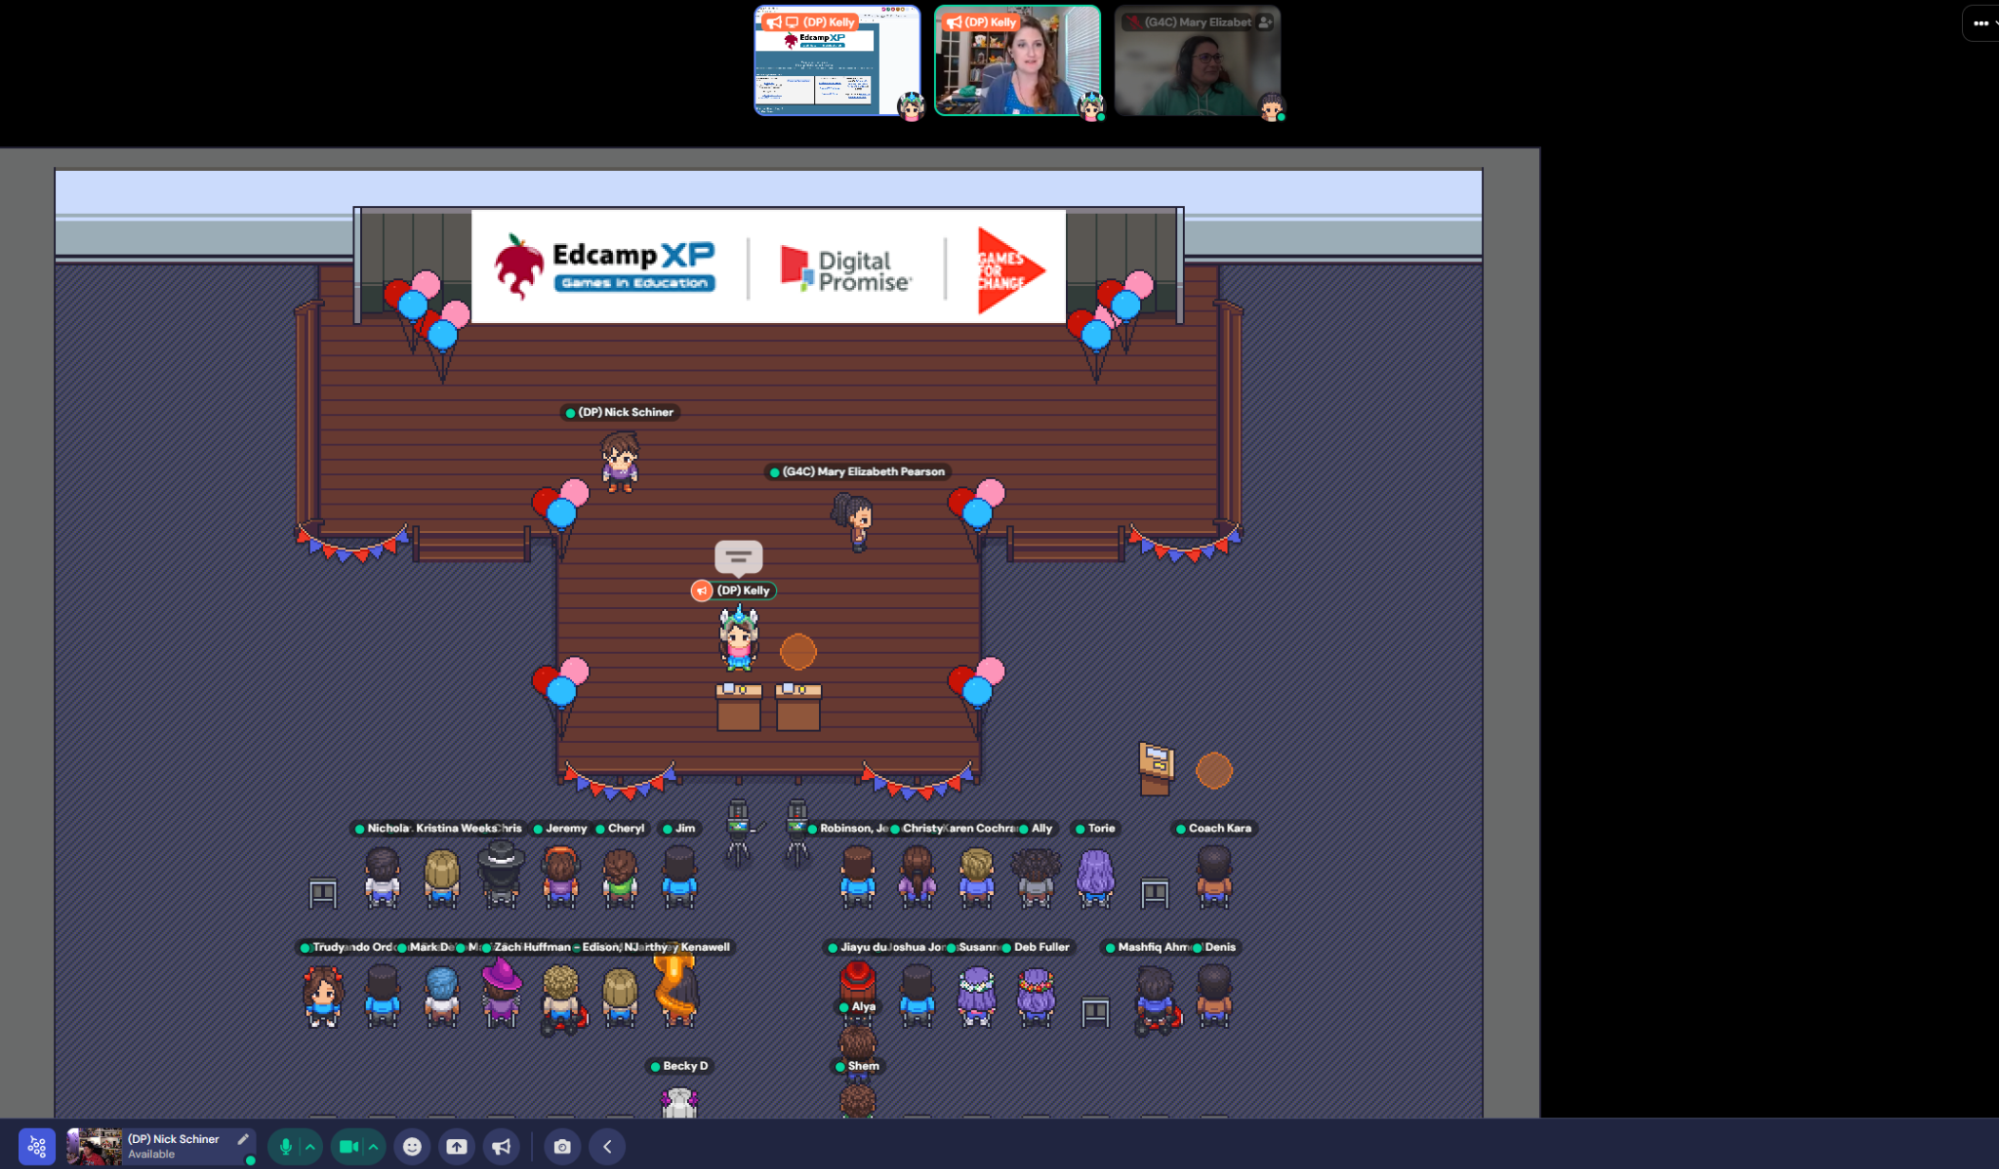 Picture of an 8 bit style room with a stage with the logos Edcamp XP, Digital Promise, and Games for Change. Avatars sit in chairs facing the stage. 